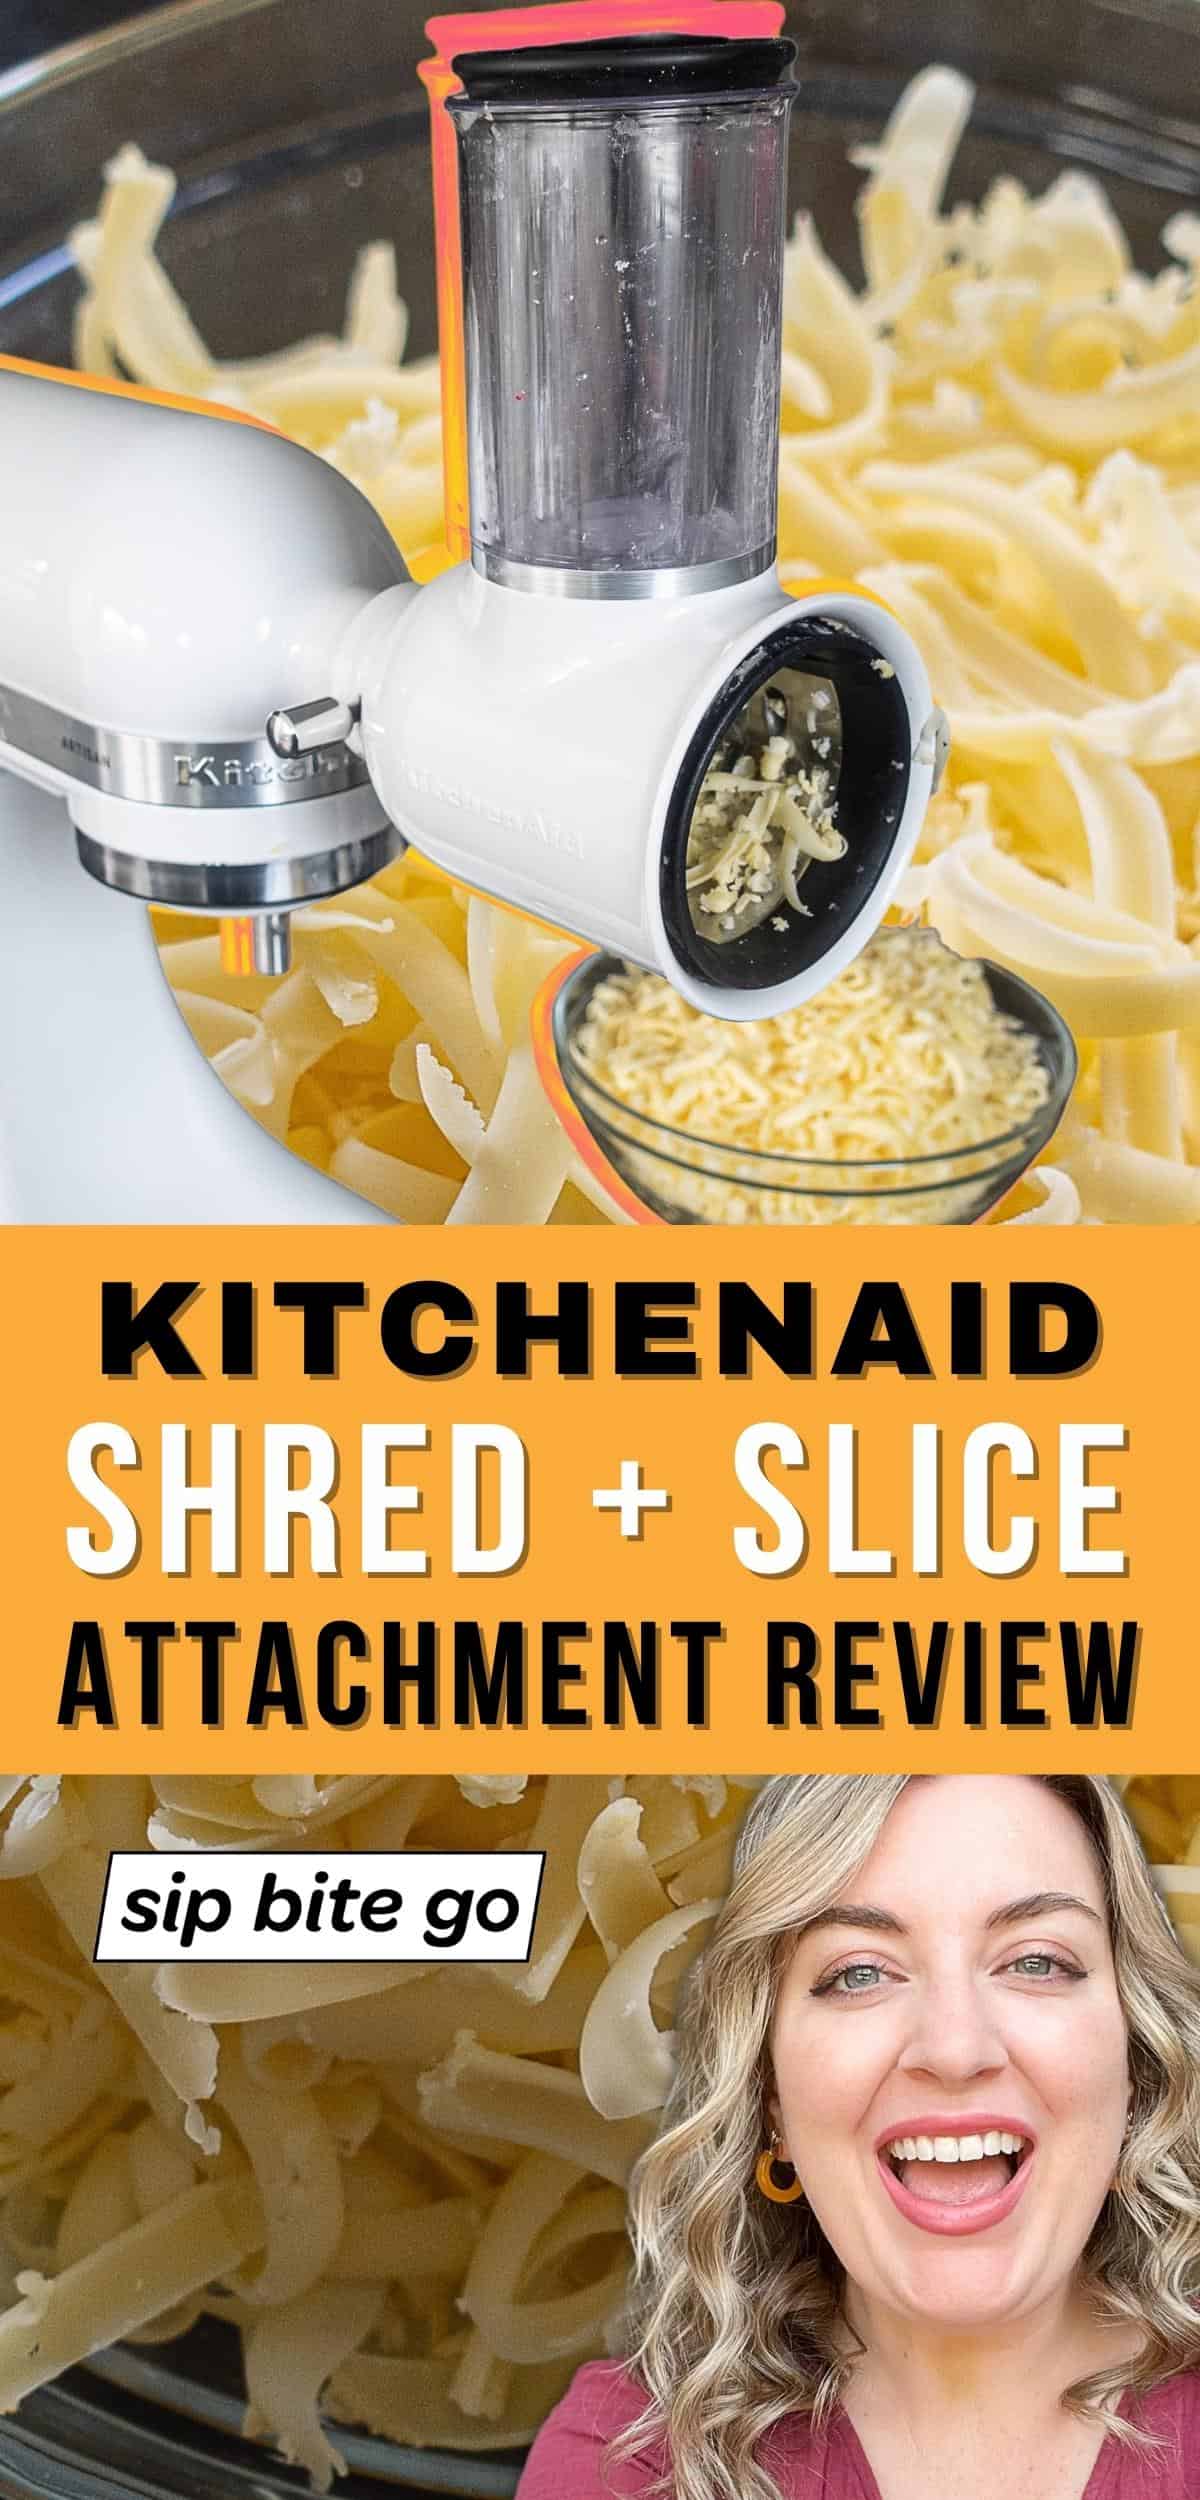 https://sipbitego.com/wp-content/uploads/2023/04/Kitchenaid-Fresh-Prep-Slicer-Shredder-Attachment-with-shredded-cheese-and-text-overlay-with-Jenna-Passaro-and-Sip-Bite-Go-logo.jpeg